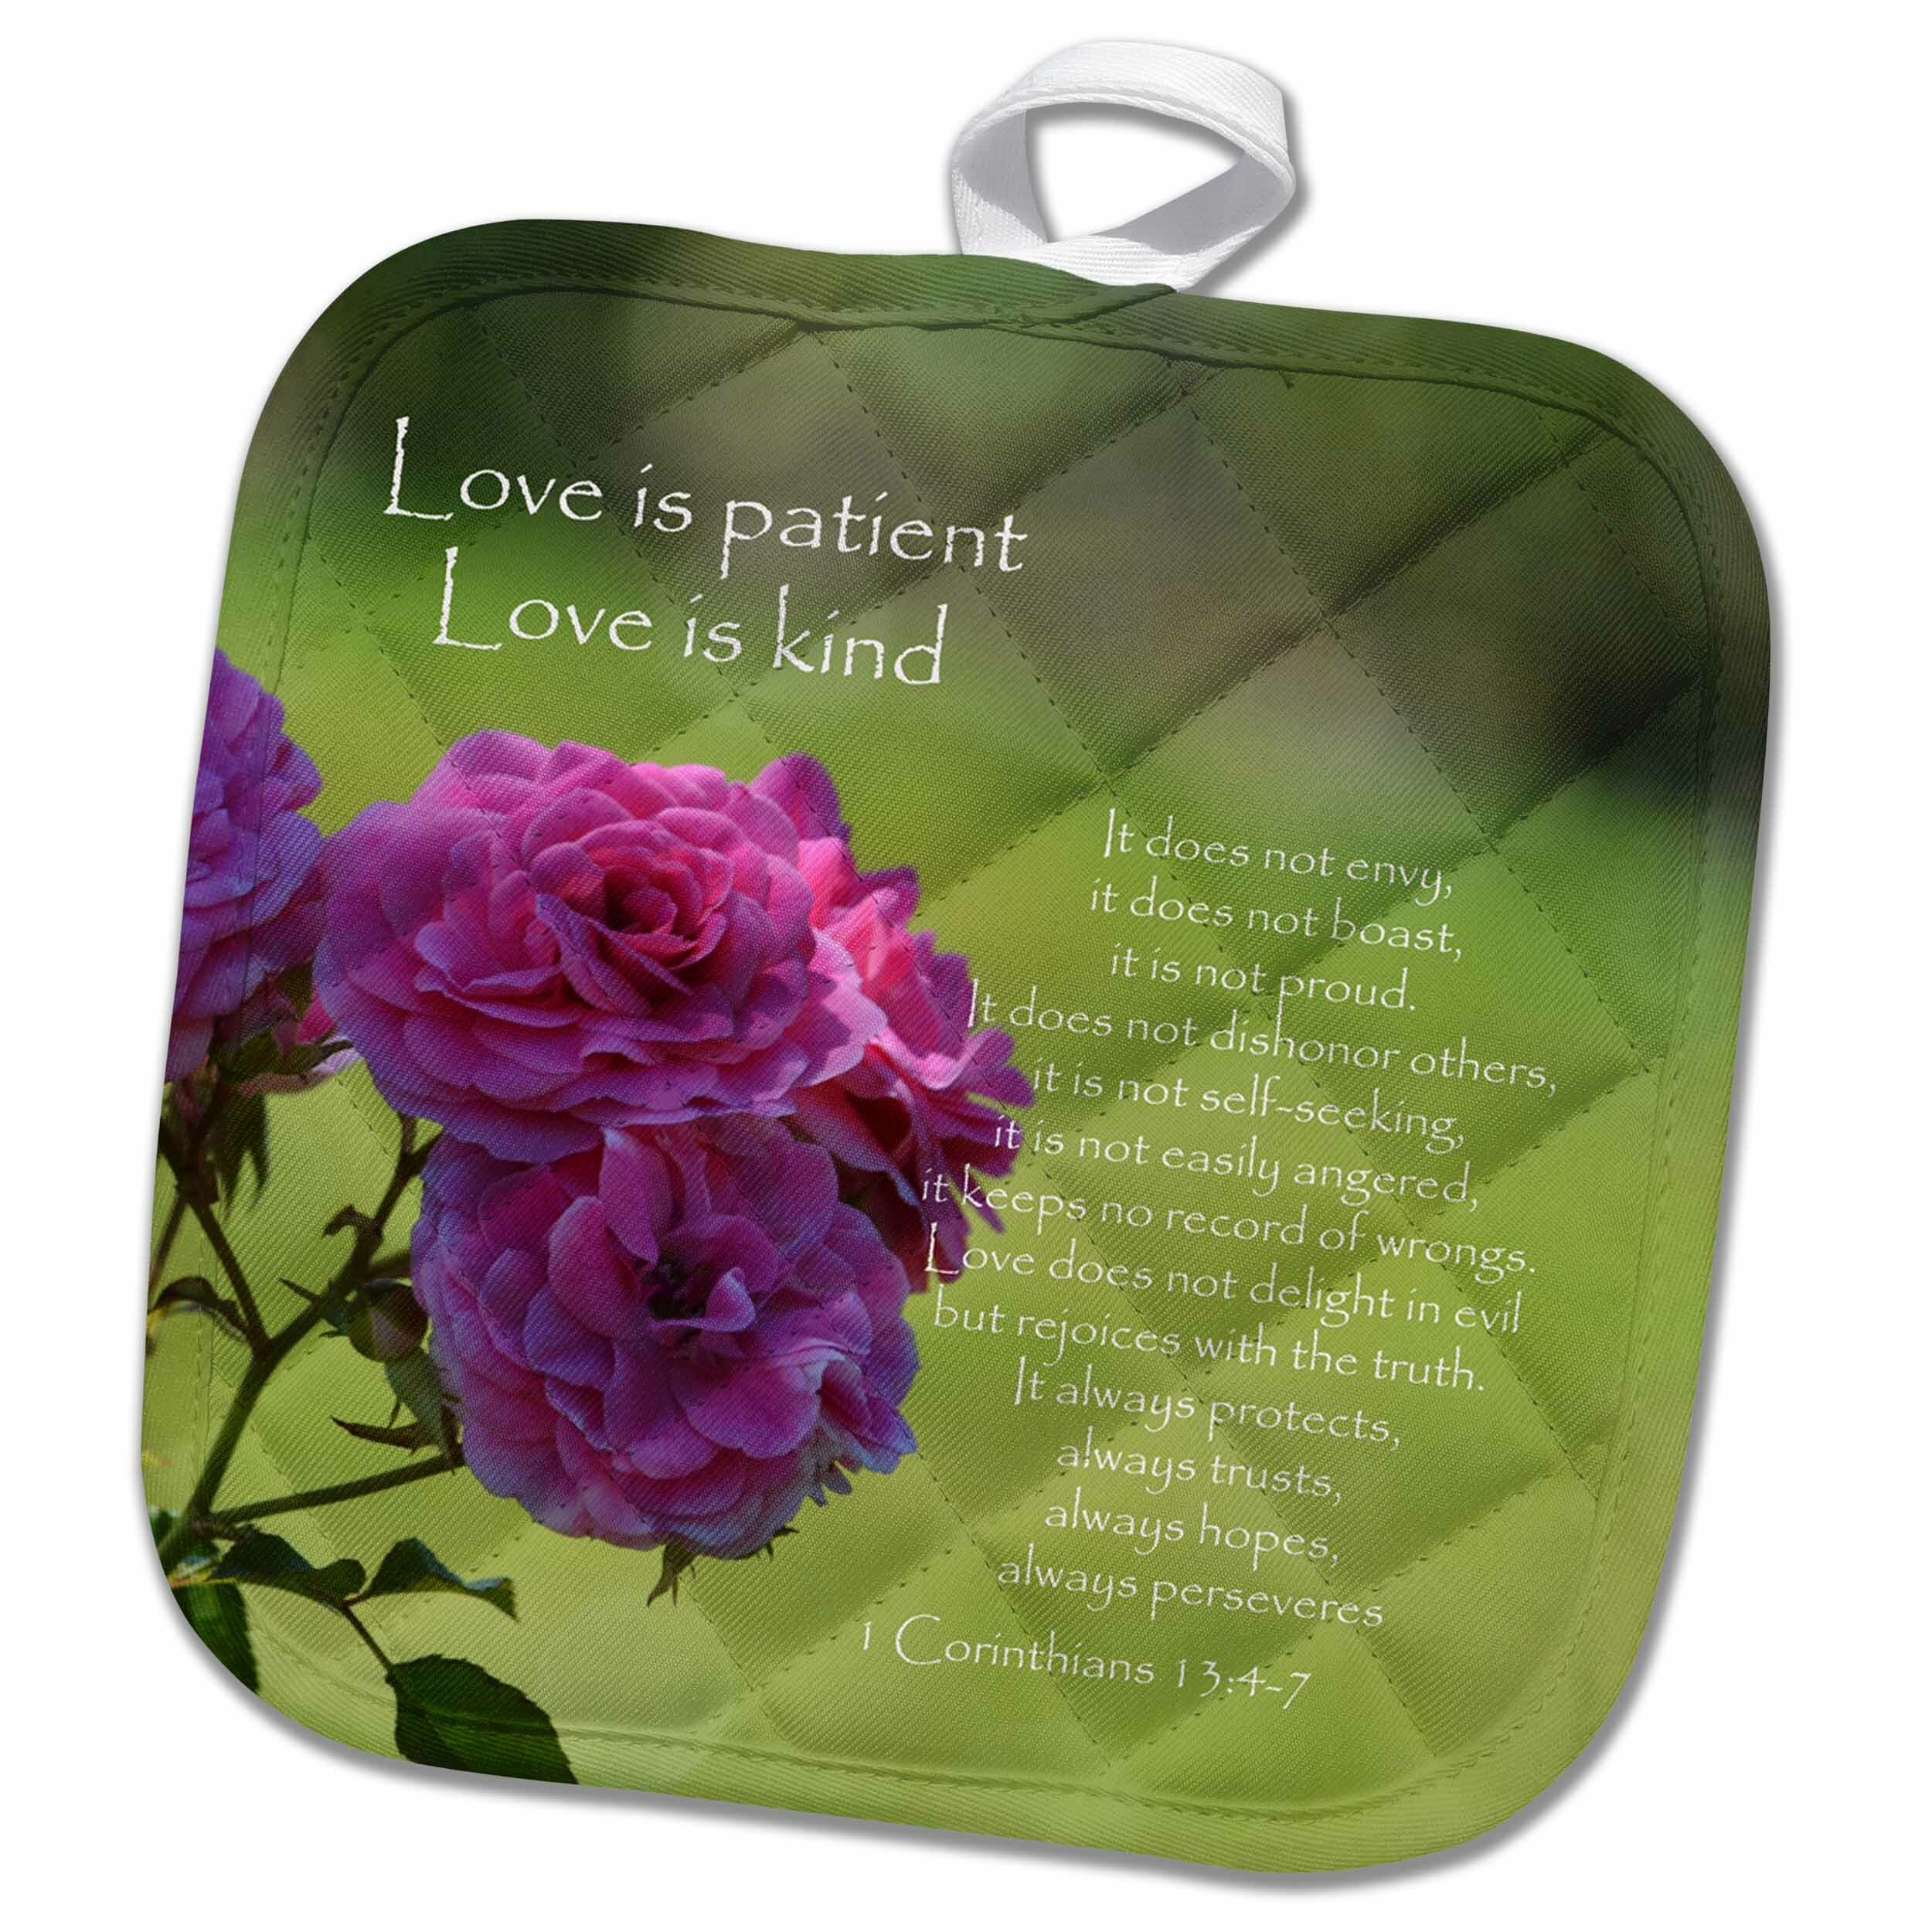 3D Rose Pretty Pink Roses Love is Patient Bible Verse Inspirational Pot Holder 8 x 8